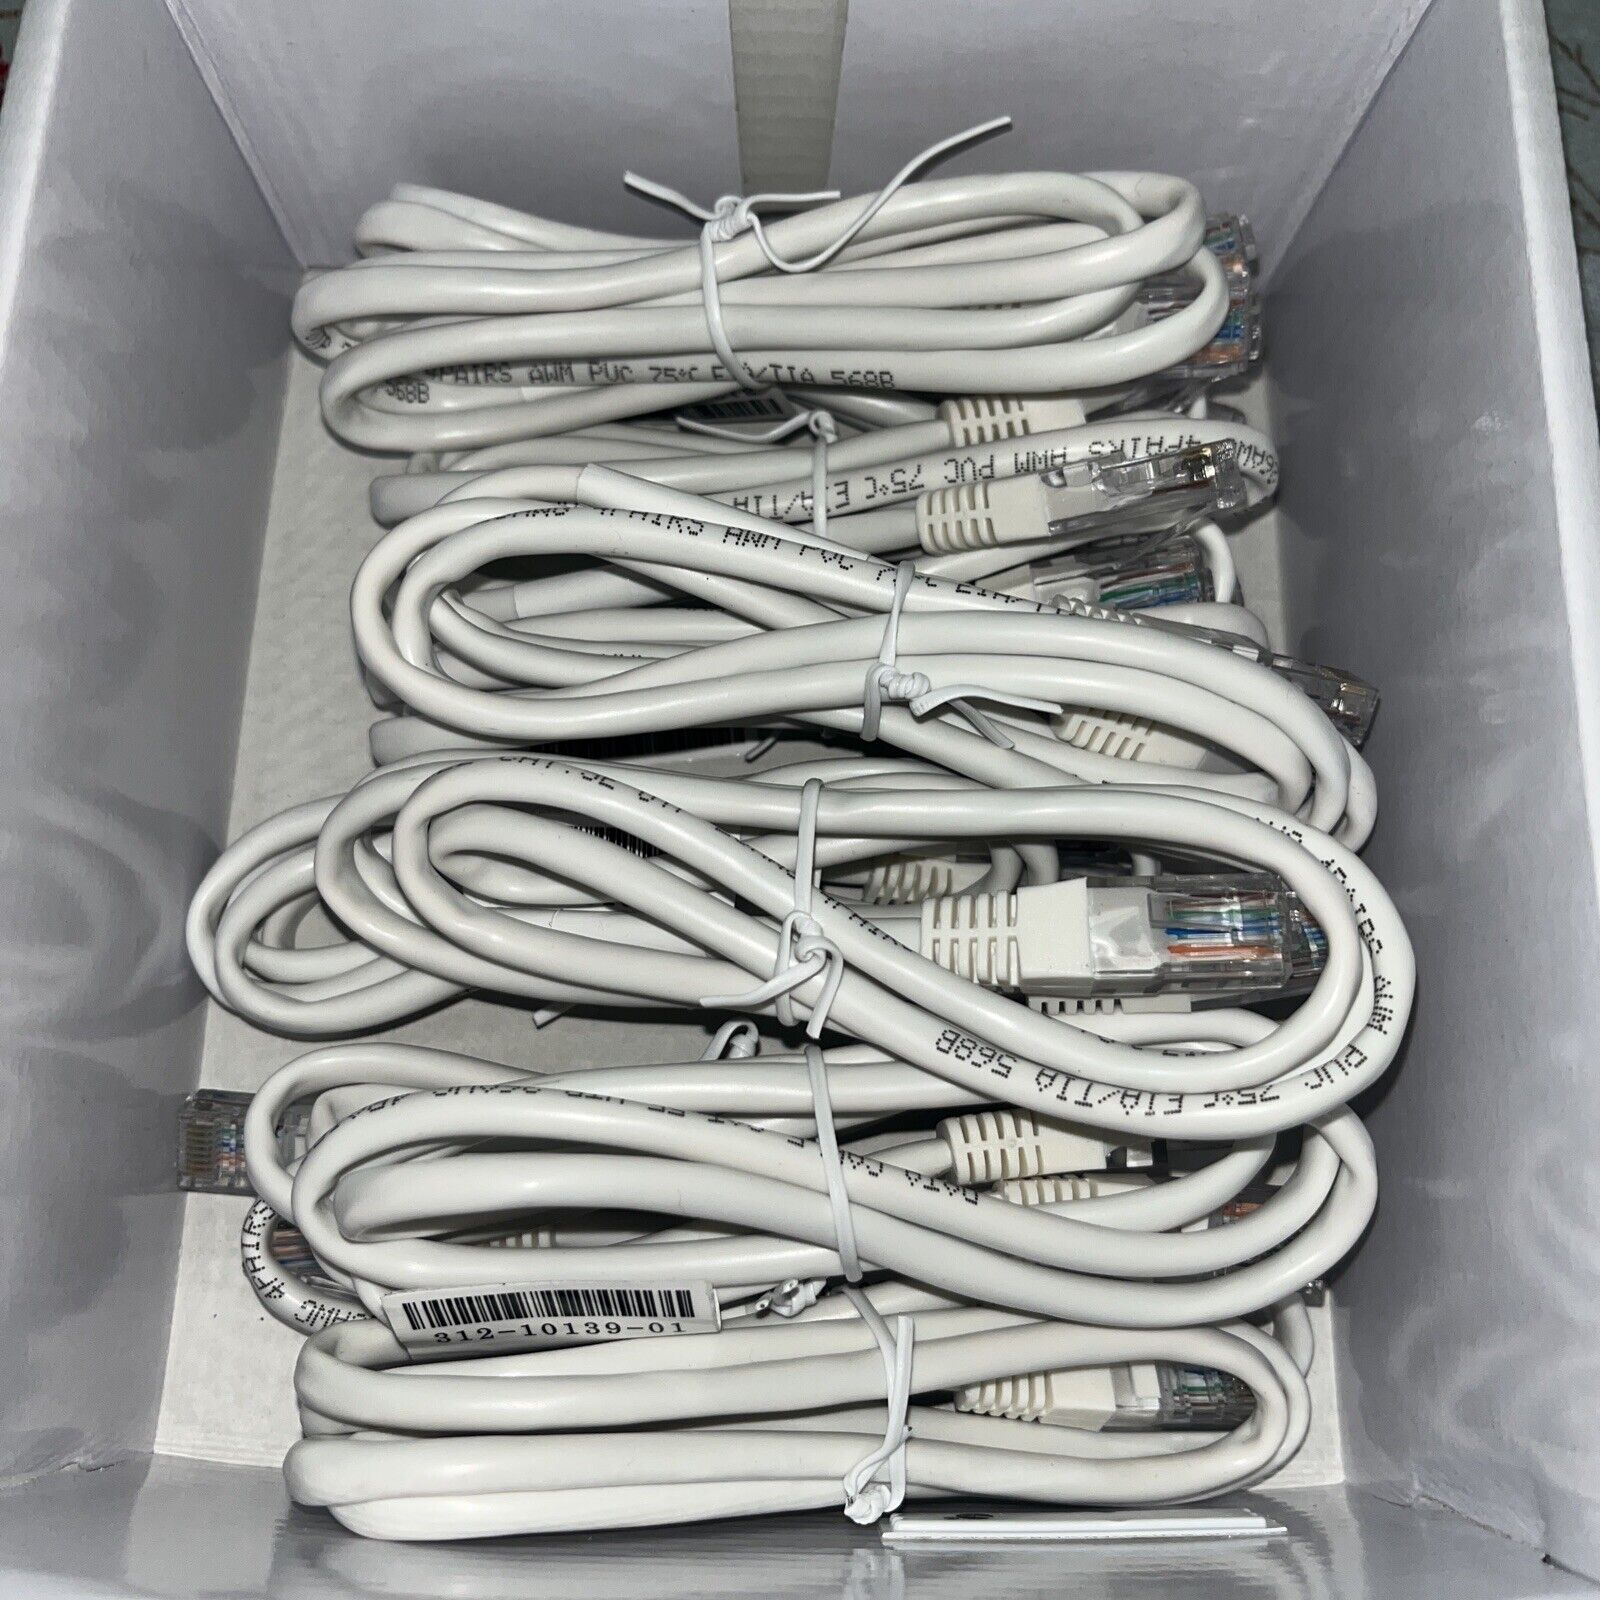 Lot of 10 Belkin Cat5e patch cords white 3 Foot cord ethernet cable RJ45